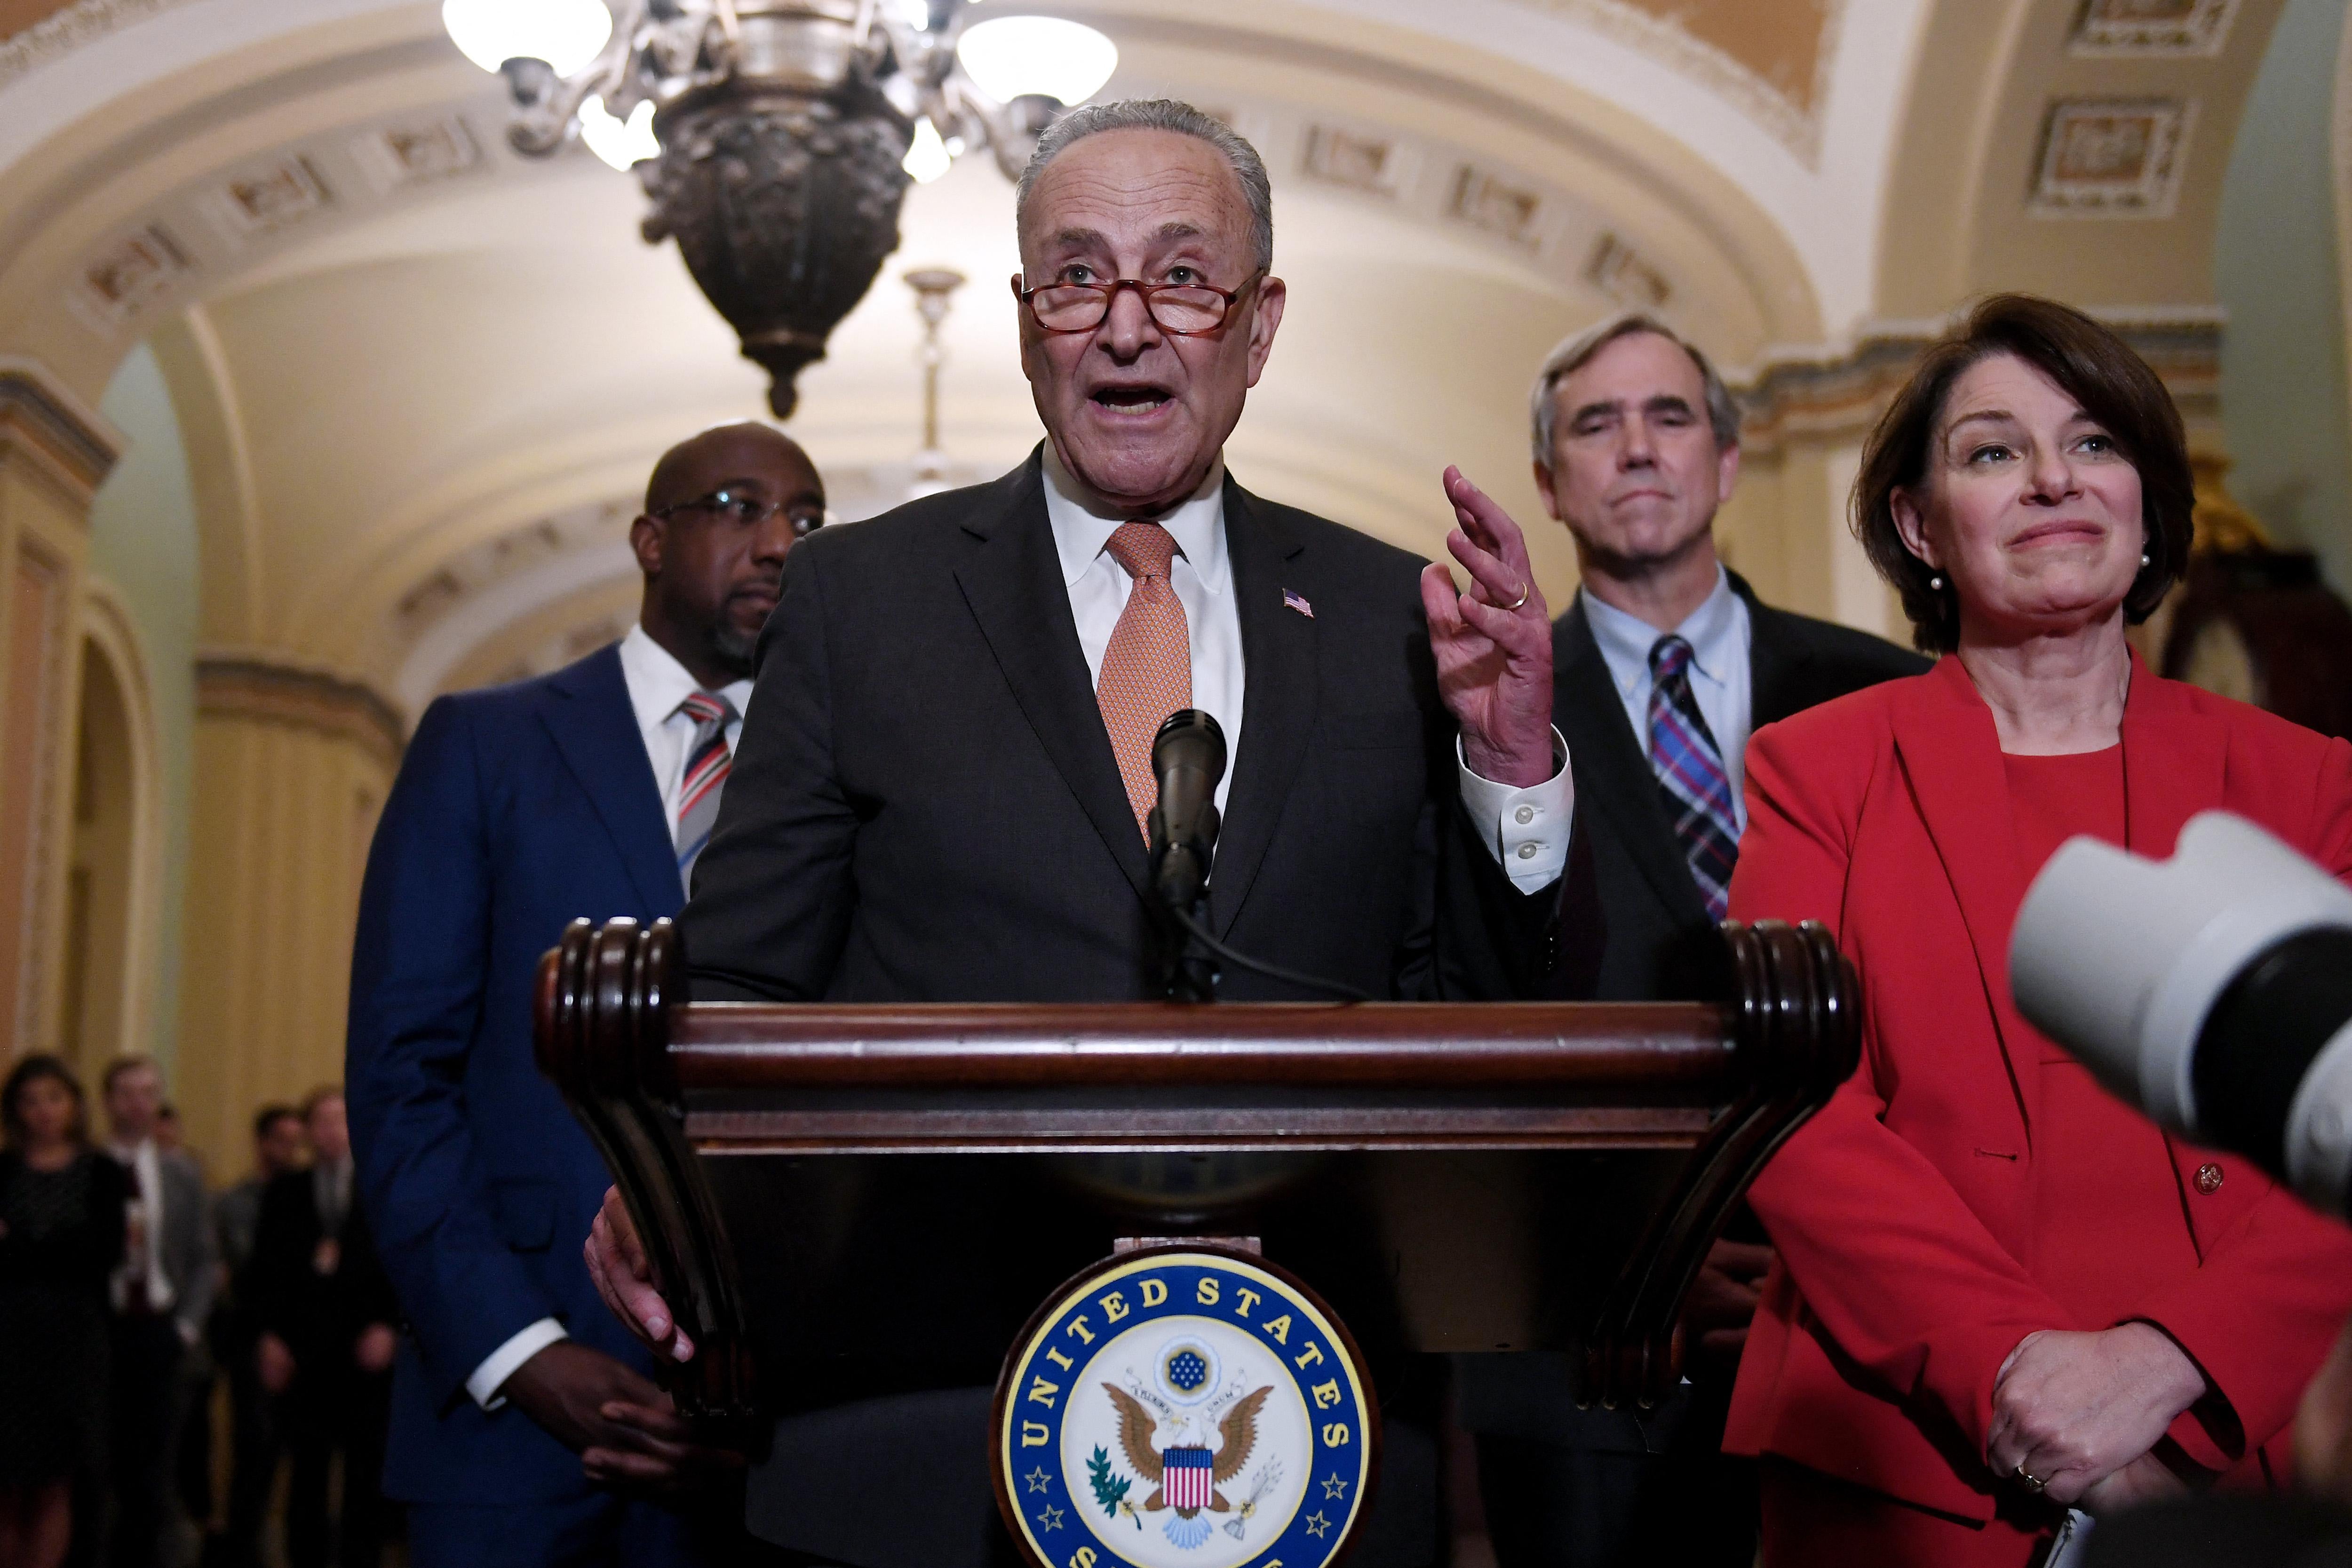 Senate Majority Leader Chuck Schumer speaks about the For the People Act at the Capitol in Washington, DC on June 22, 2021.